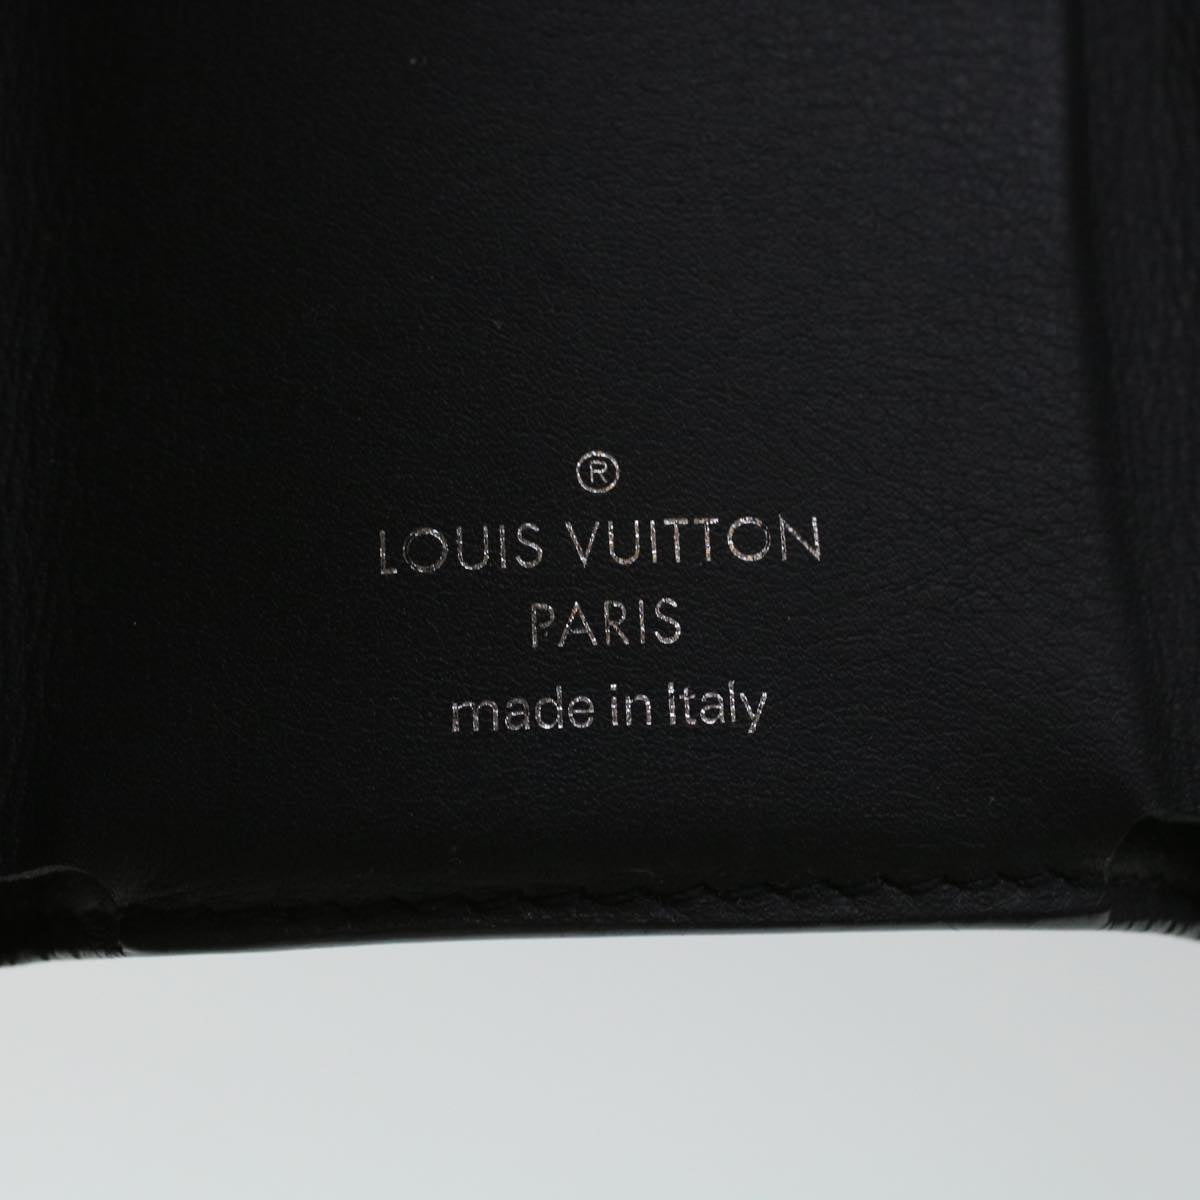 LOUISVUITTON Monogram Eclipse Reverse Discovery Compact Wallet M45417 Auth 42524